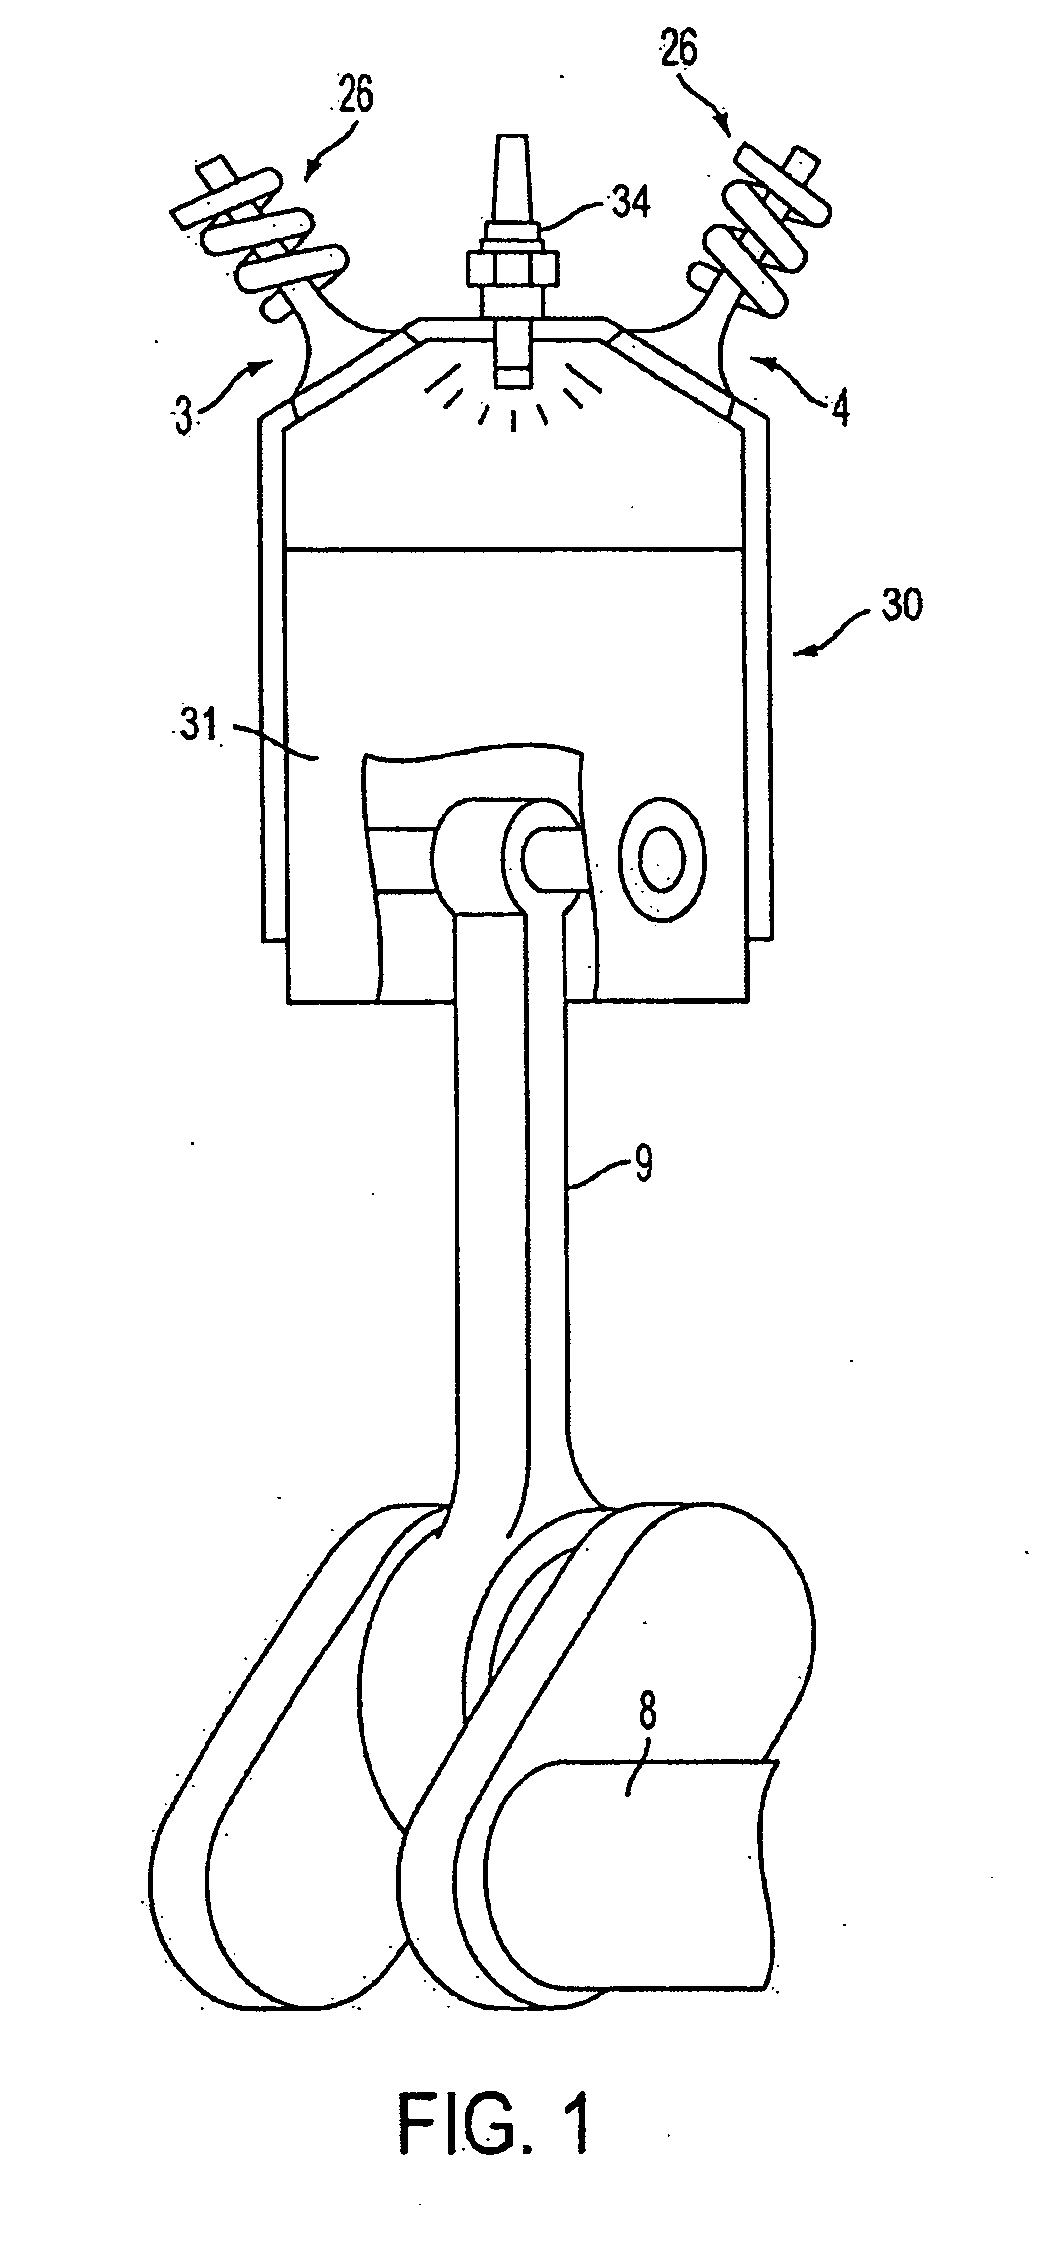 Hydrogen fueled external combustion engine and method of converting internal combustion engine thereto